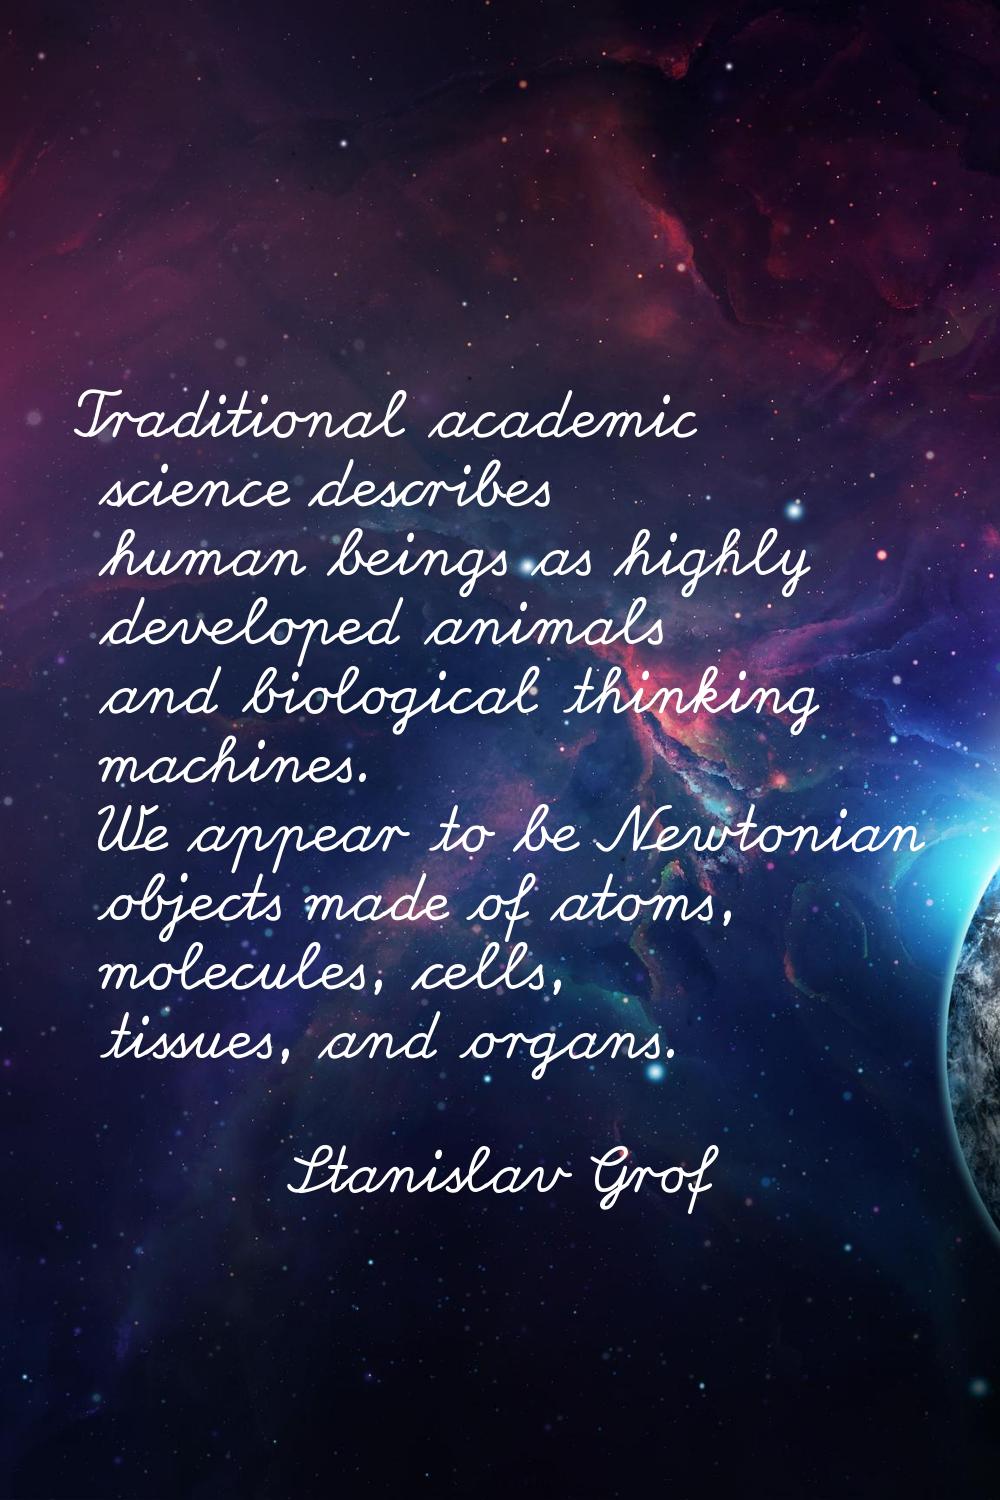 Traditional academic science describes human beings as highly developed animals and biological thin